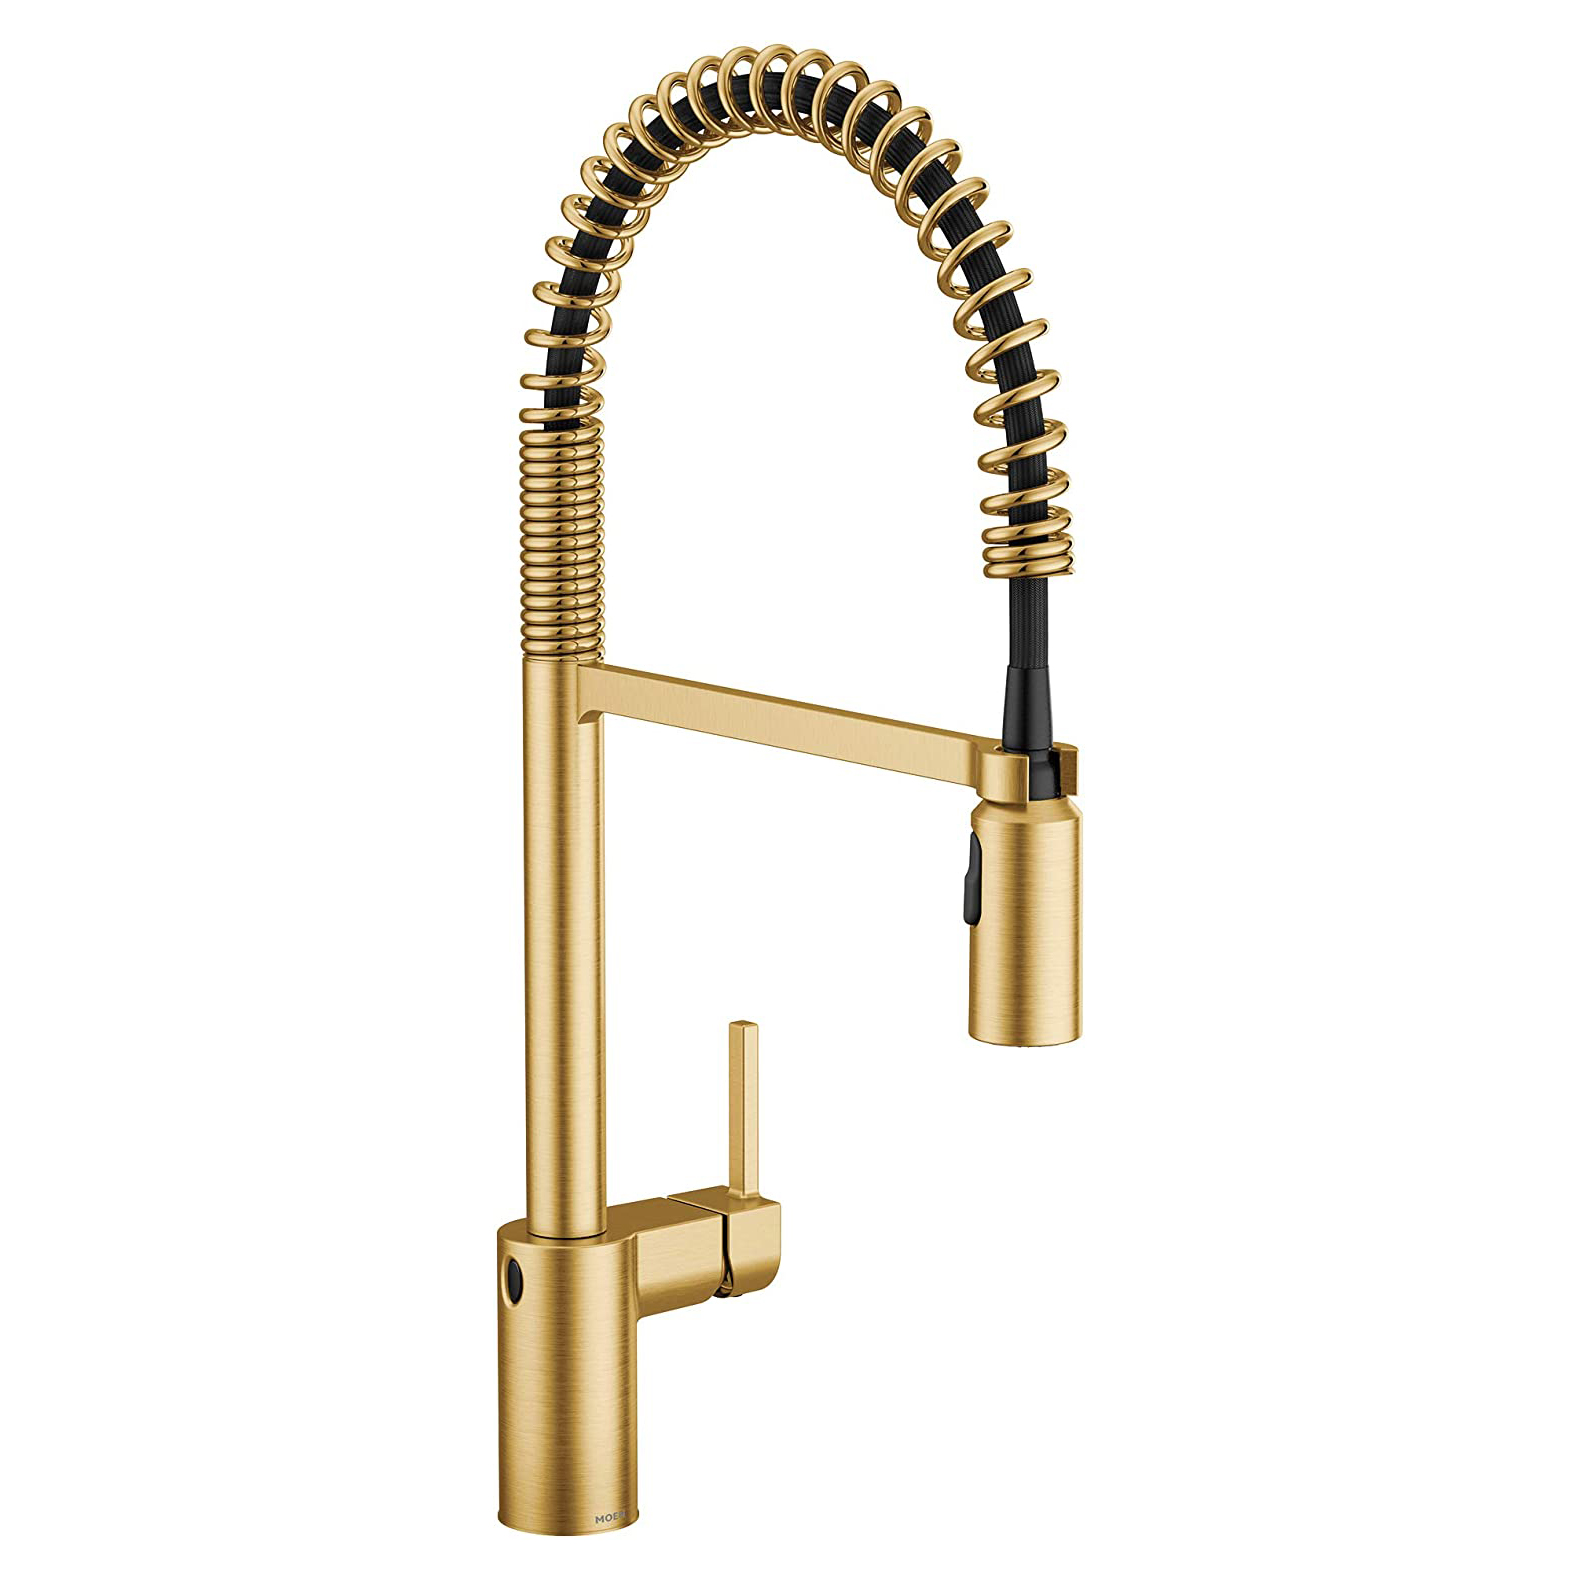 Align Pulldown MotionSense Wave Kitchen Faucet in Brush Gold